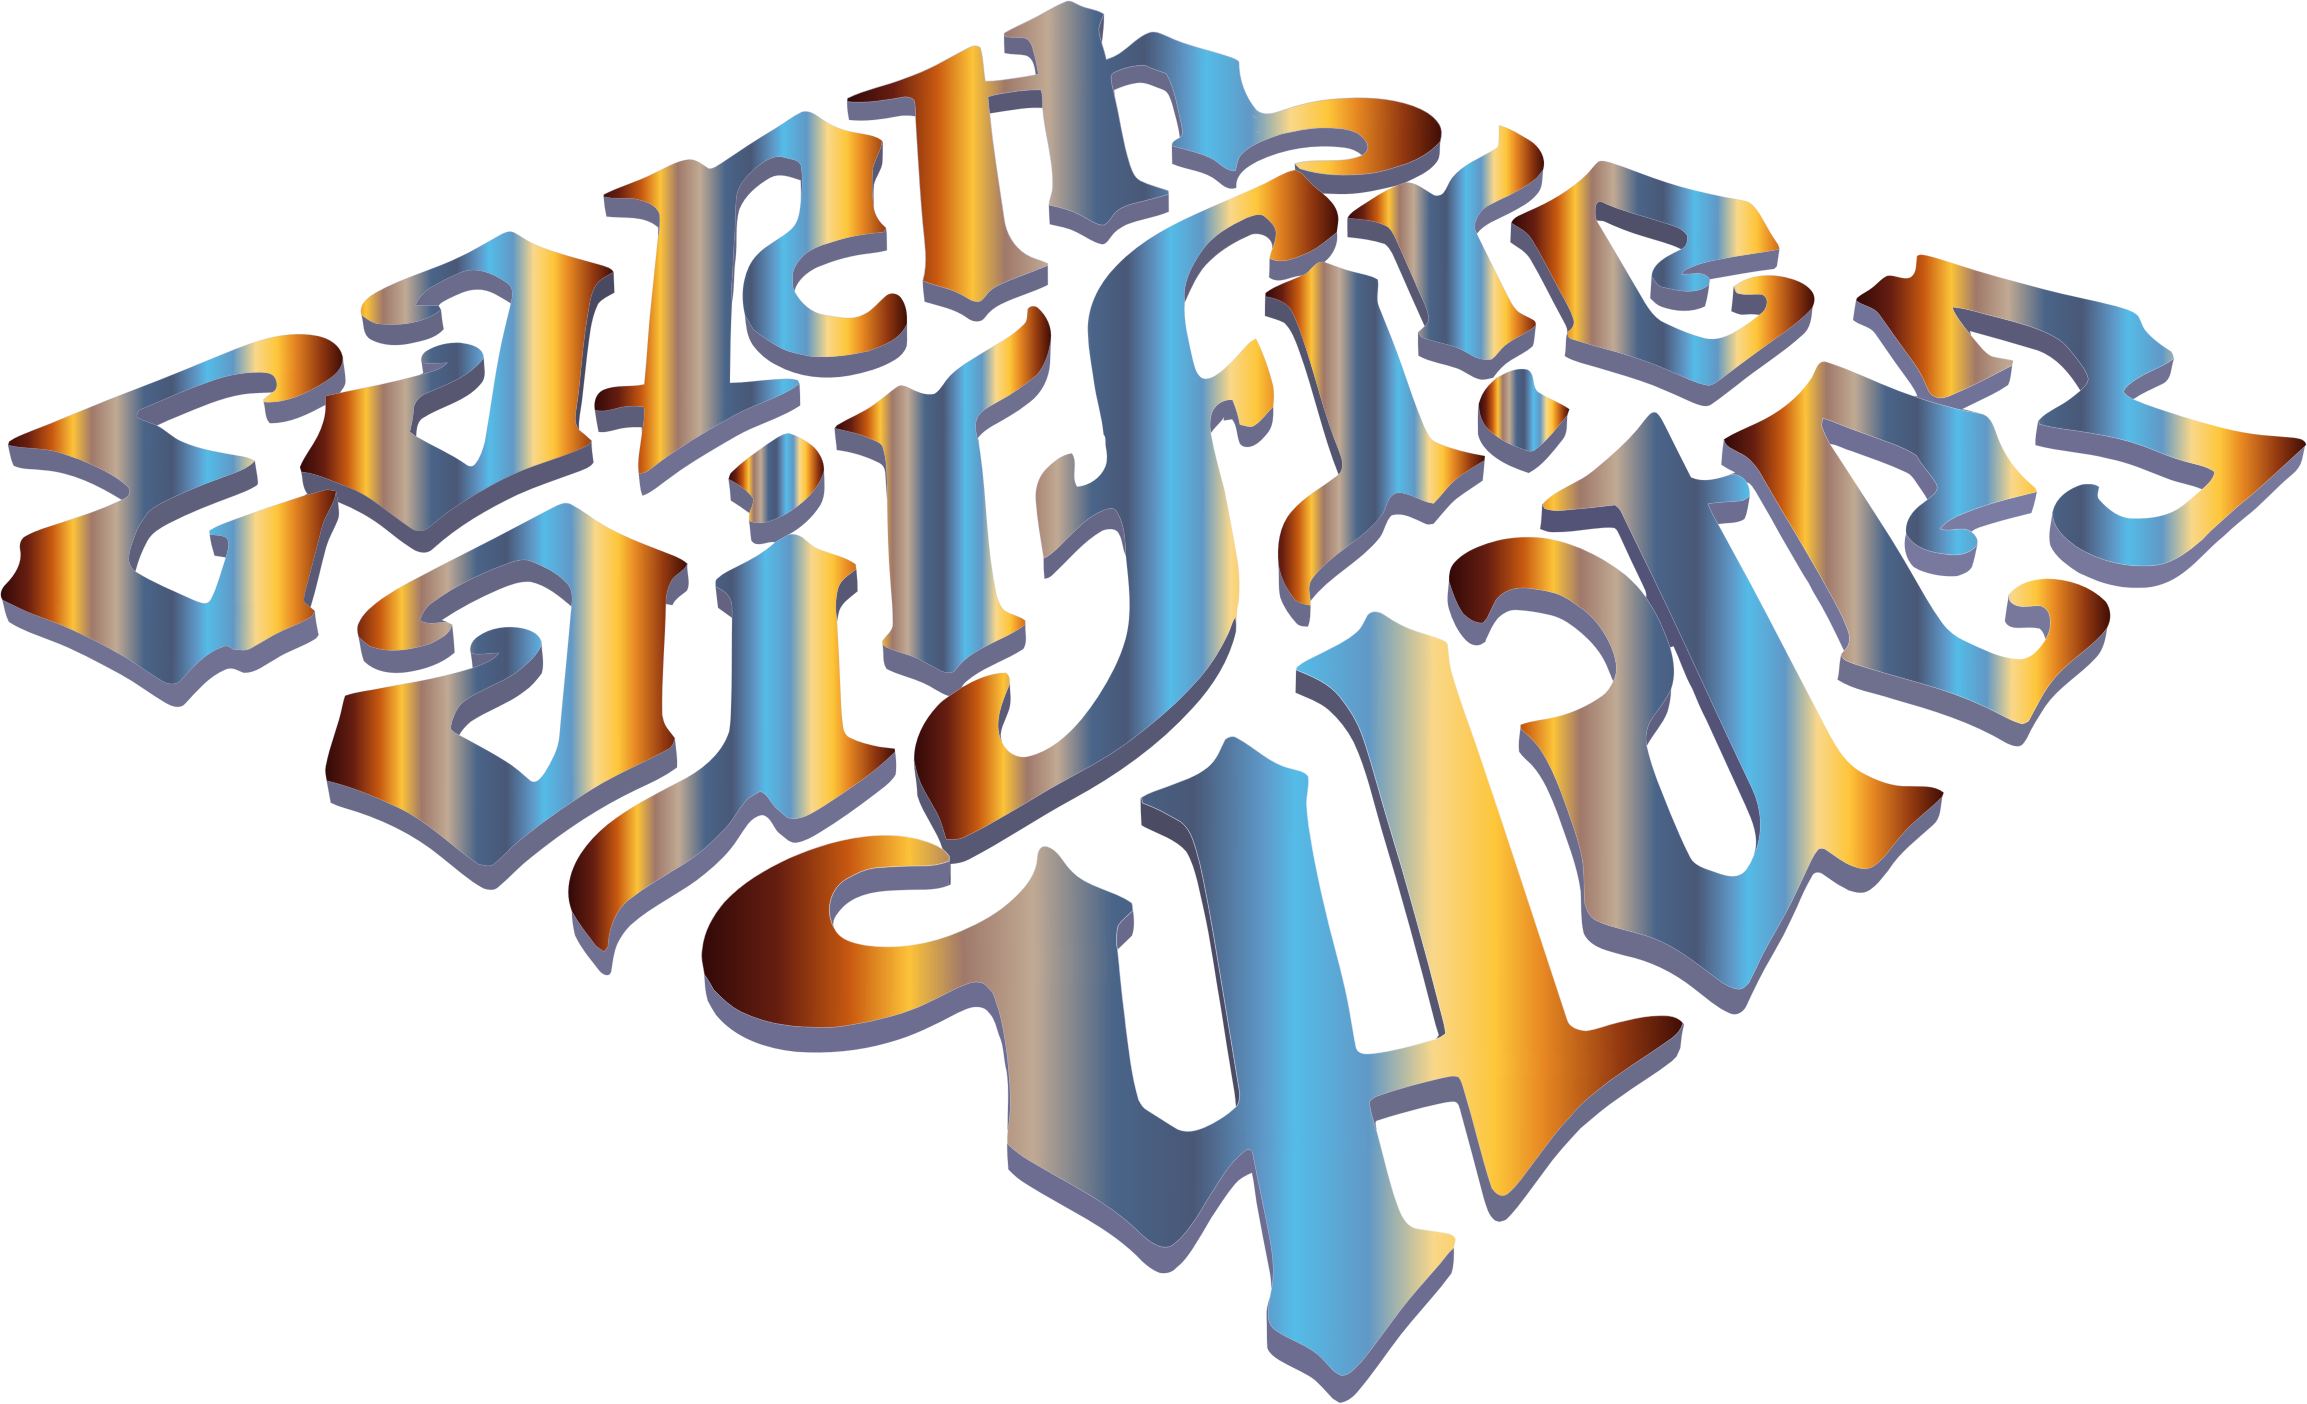 Air Fire Water Ambigram 2 No Background - Air (2307x1404)